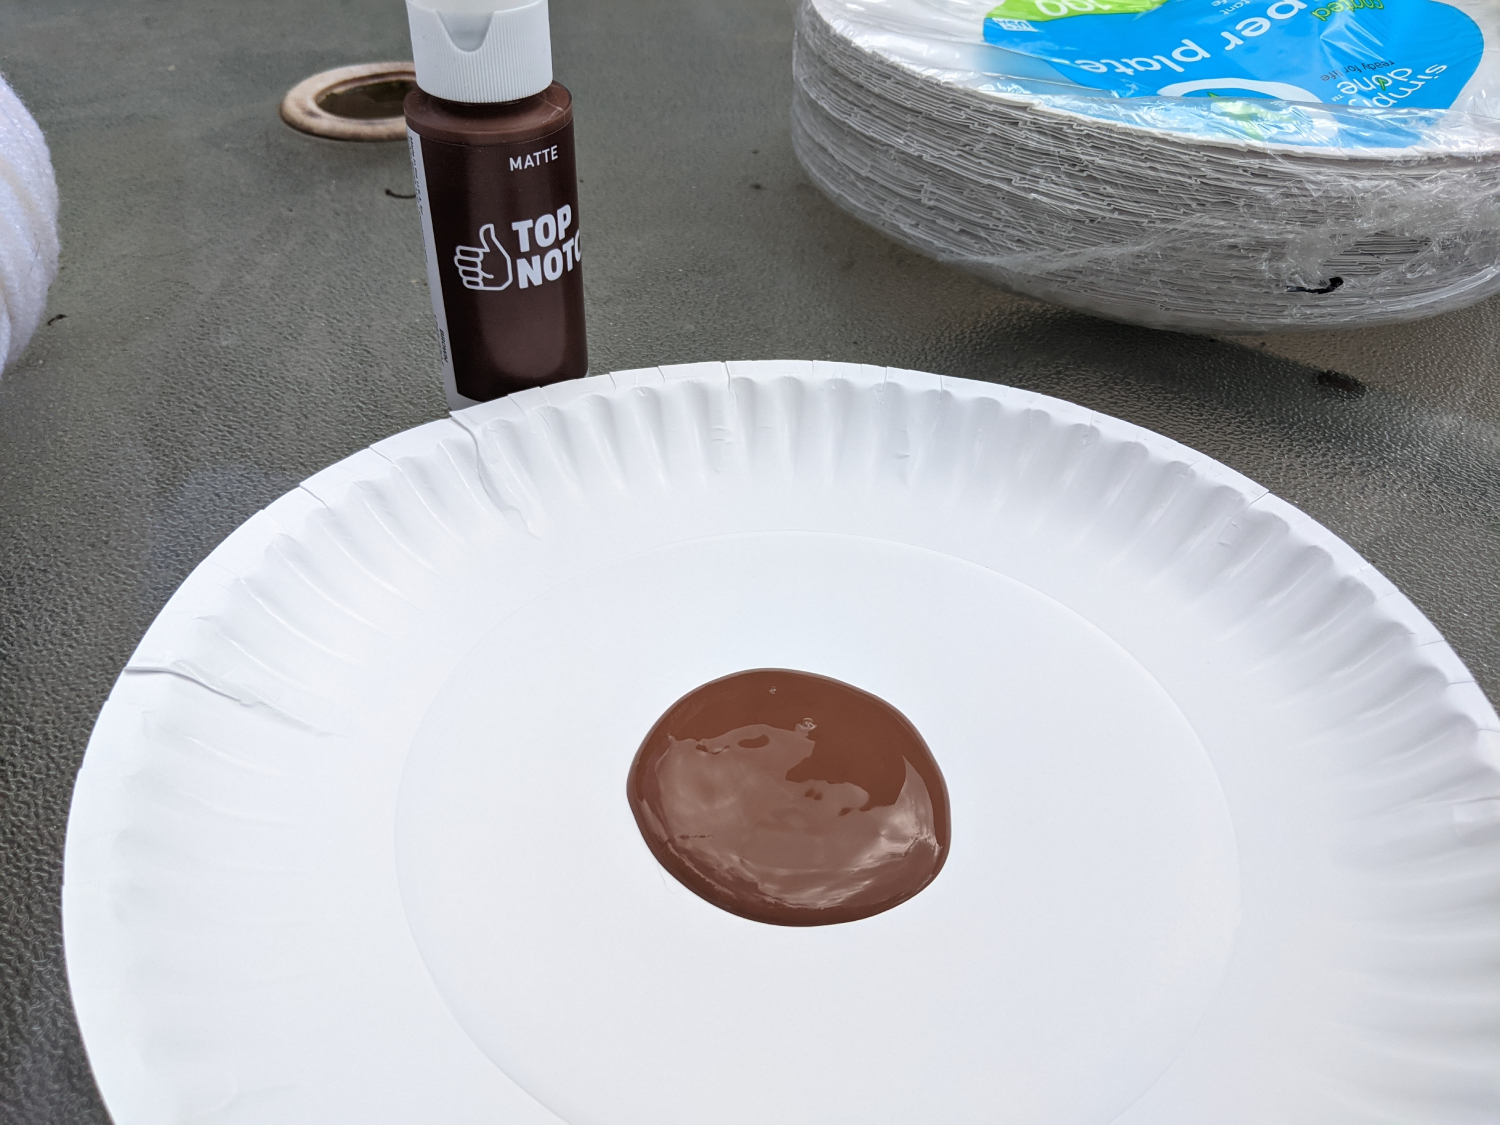 A dollop of brown paint in the center of a paper plate